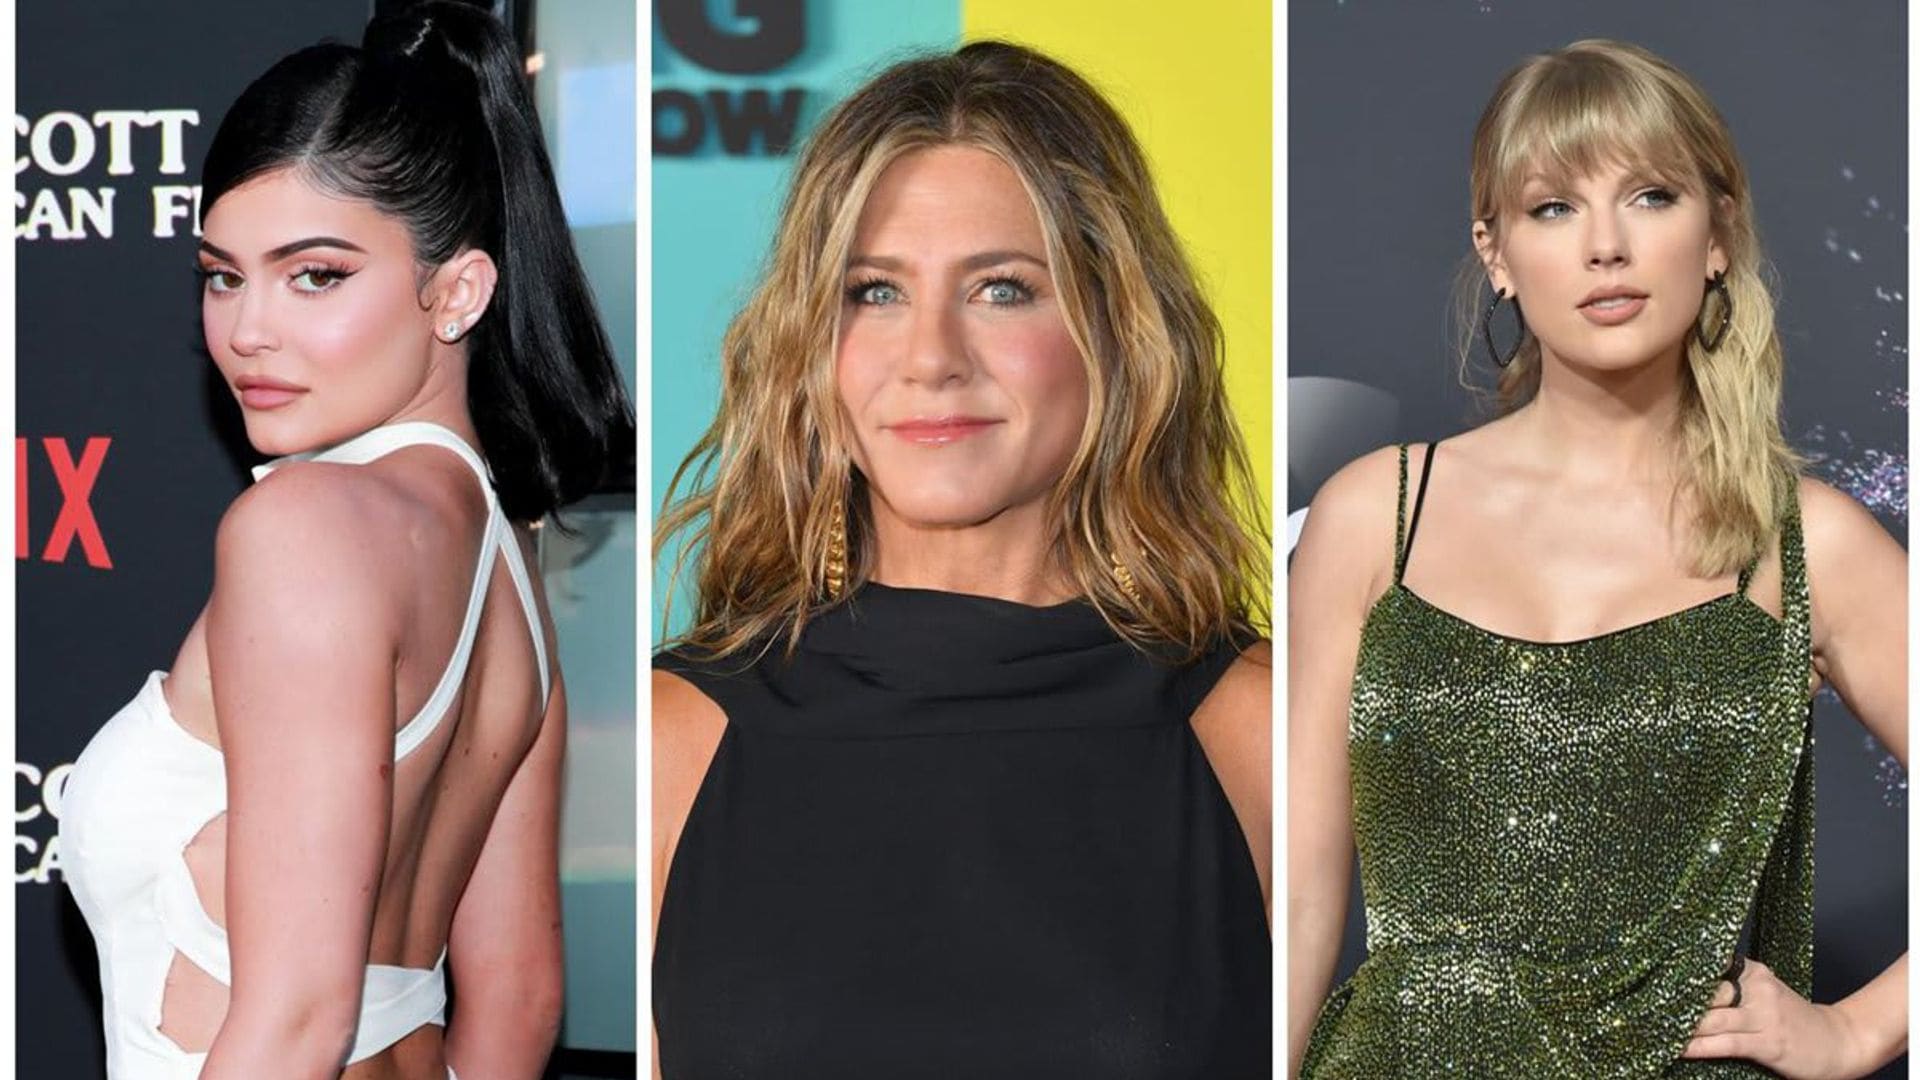 Kylie Jenner, Jennifer Aniston, and Taylor Swift all love investing in real estate